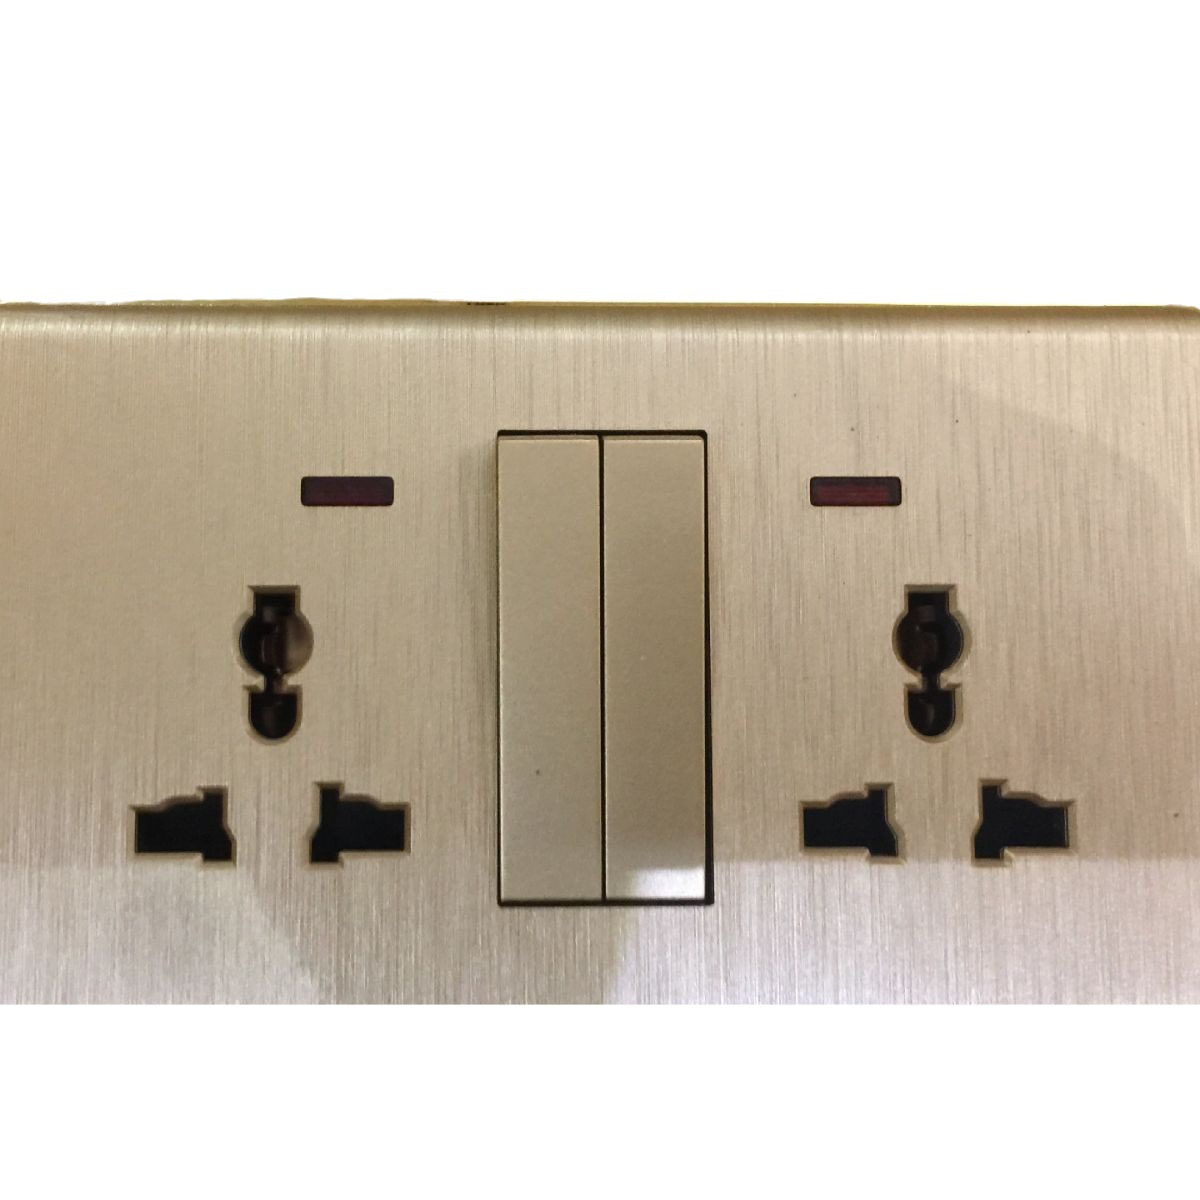 Push Button Modern Home Decorative Wall Mounted Uk Standard Electrical Sockets And Switches